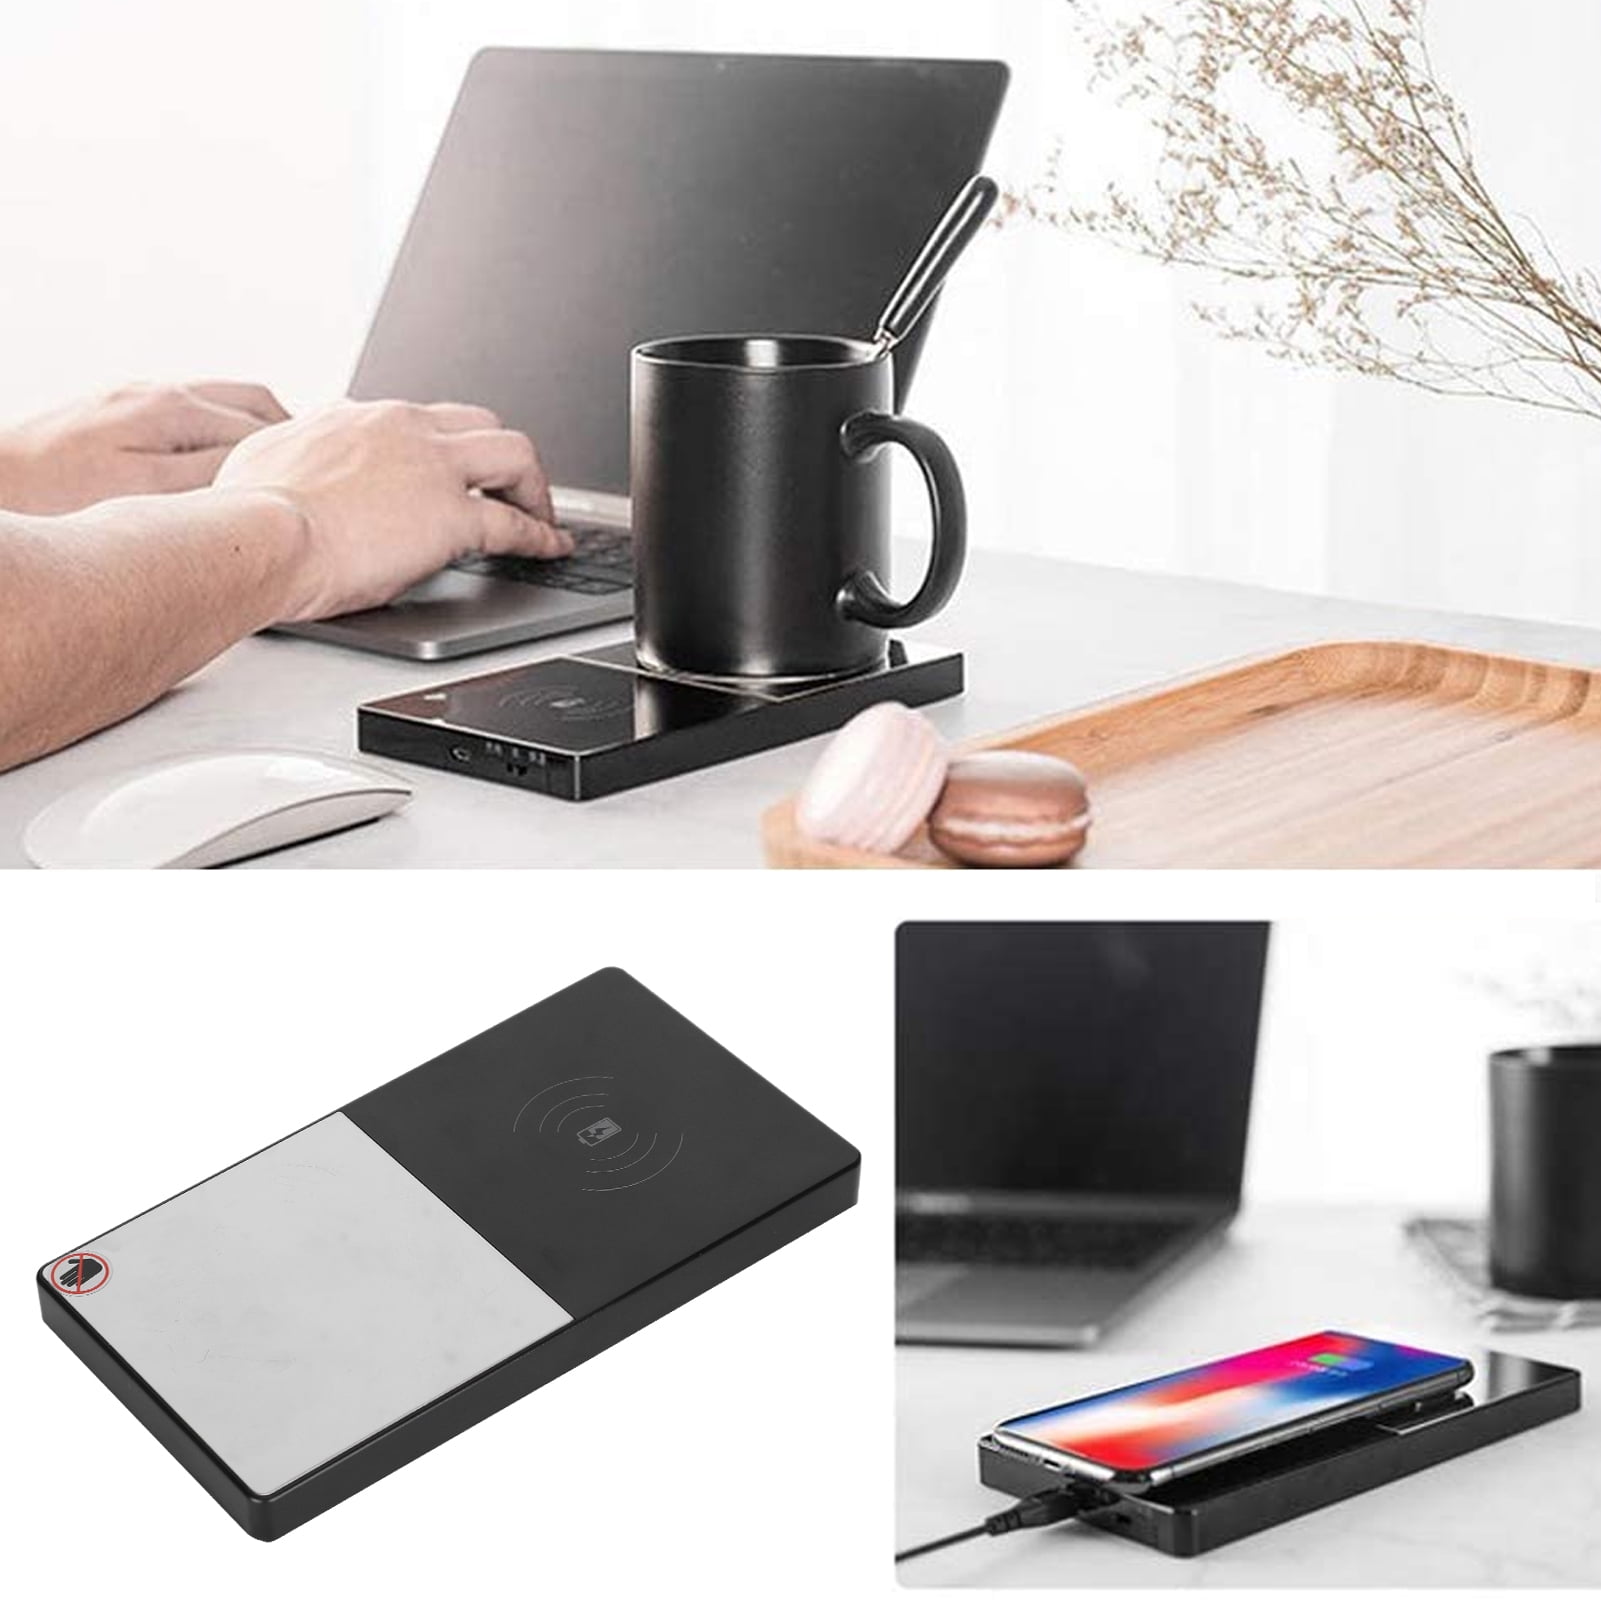 Cup Warmer and Charger USB Wireless Charger Station with Smart Multifunctional Coffee Mug Warmer Heated Coaster Electric Beverage Warmer Cup Warmer Pad Phone Charger for Home Office 